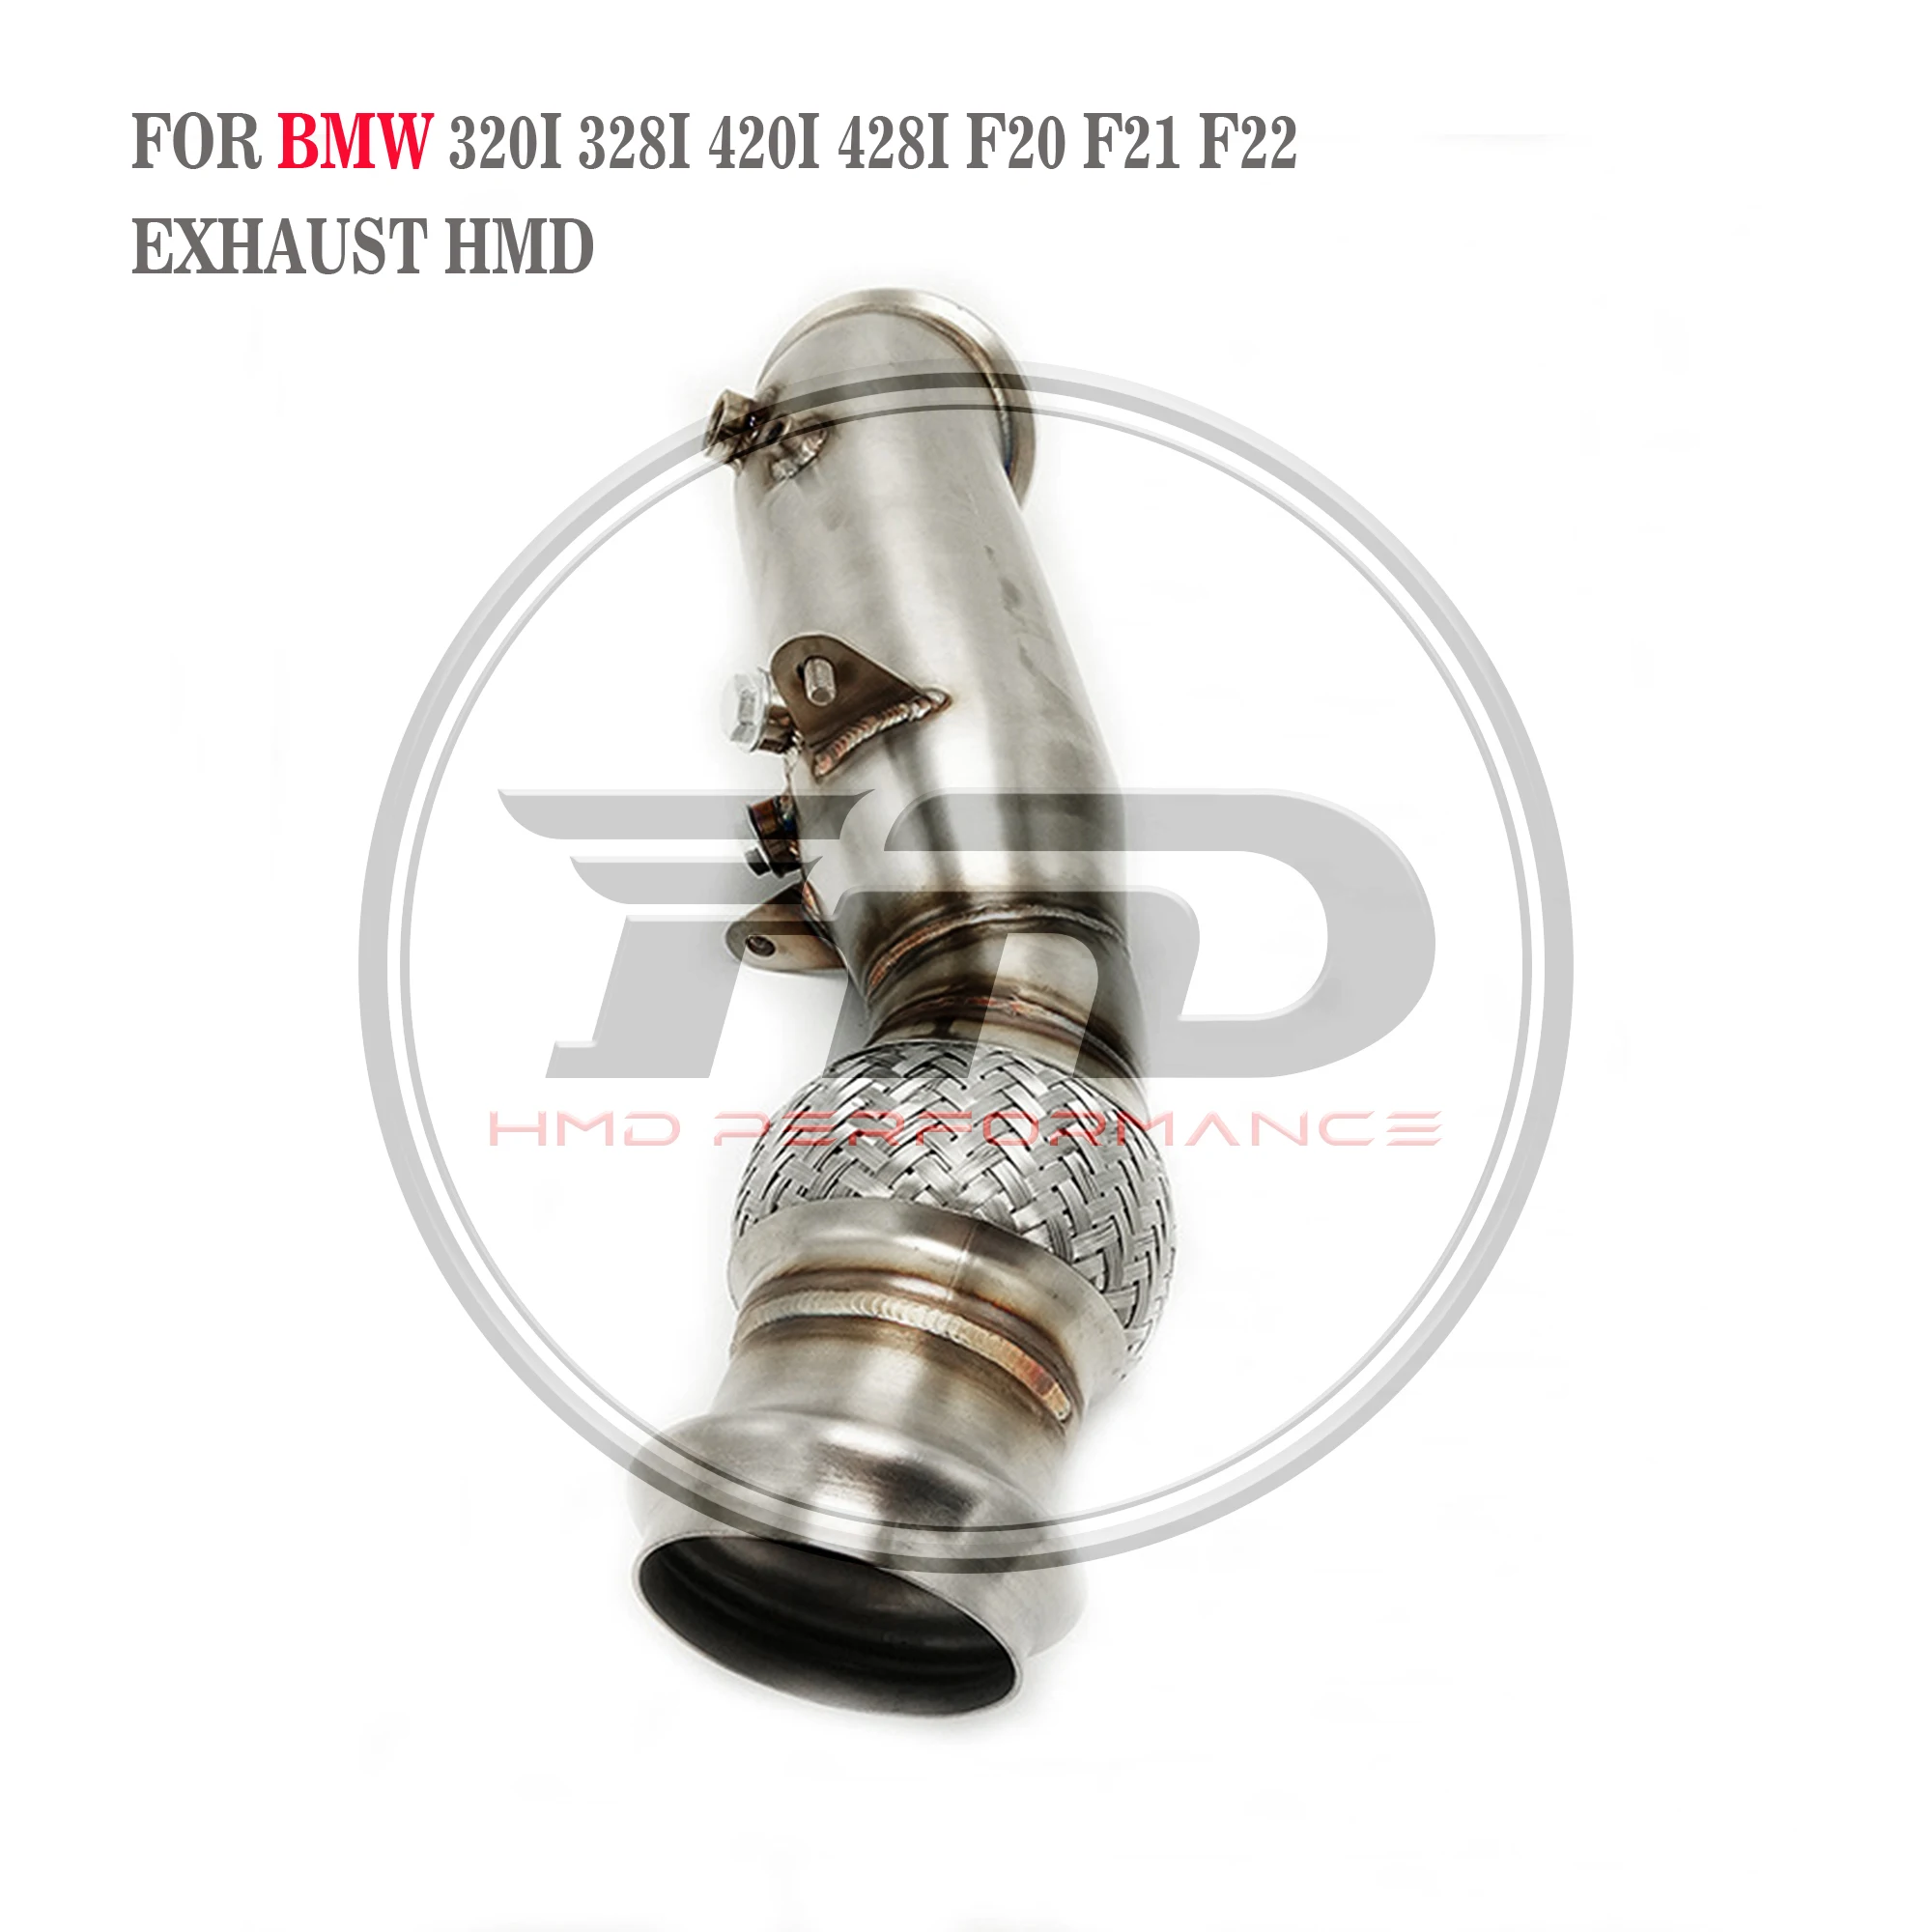 

HMD Stainless Steel Exhaust System Downpipe For BMW 320i 328i 420i 428i F20 F21 F22 High Flow Performance Tuning